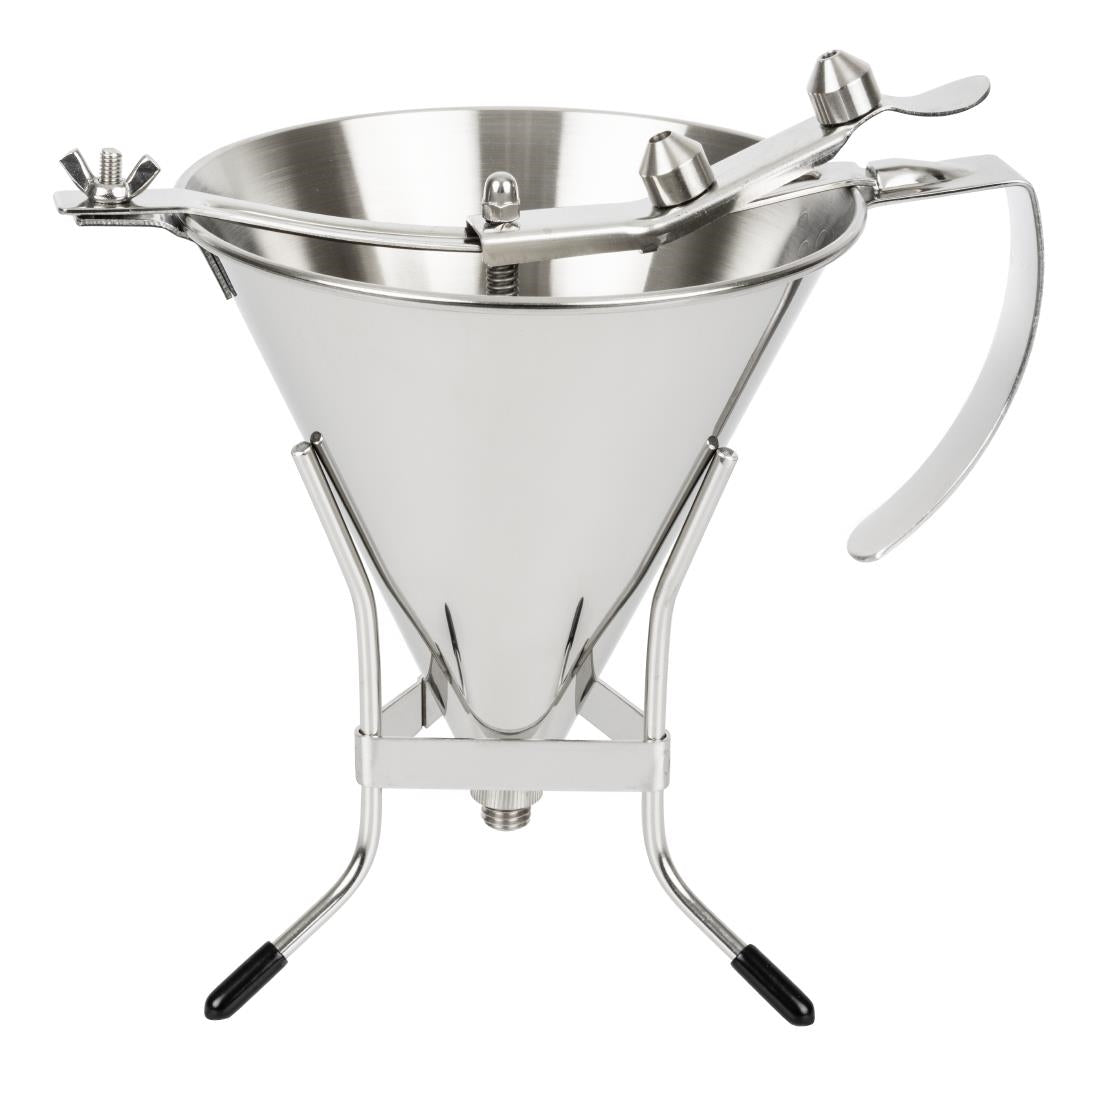 DN906 De Buyer Stainless Steel Automatic Piston Funnel 1.5ltr JD Catering Equipment Solutions Ltd